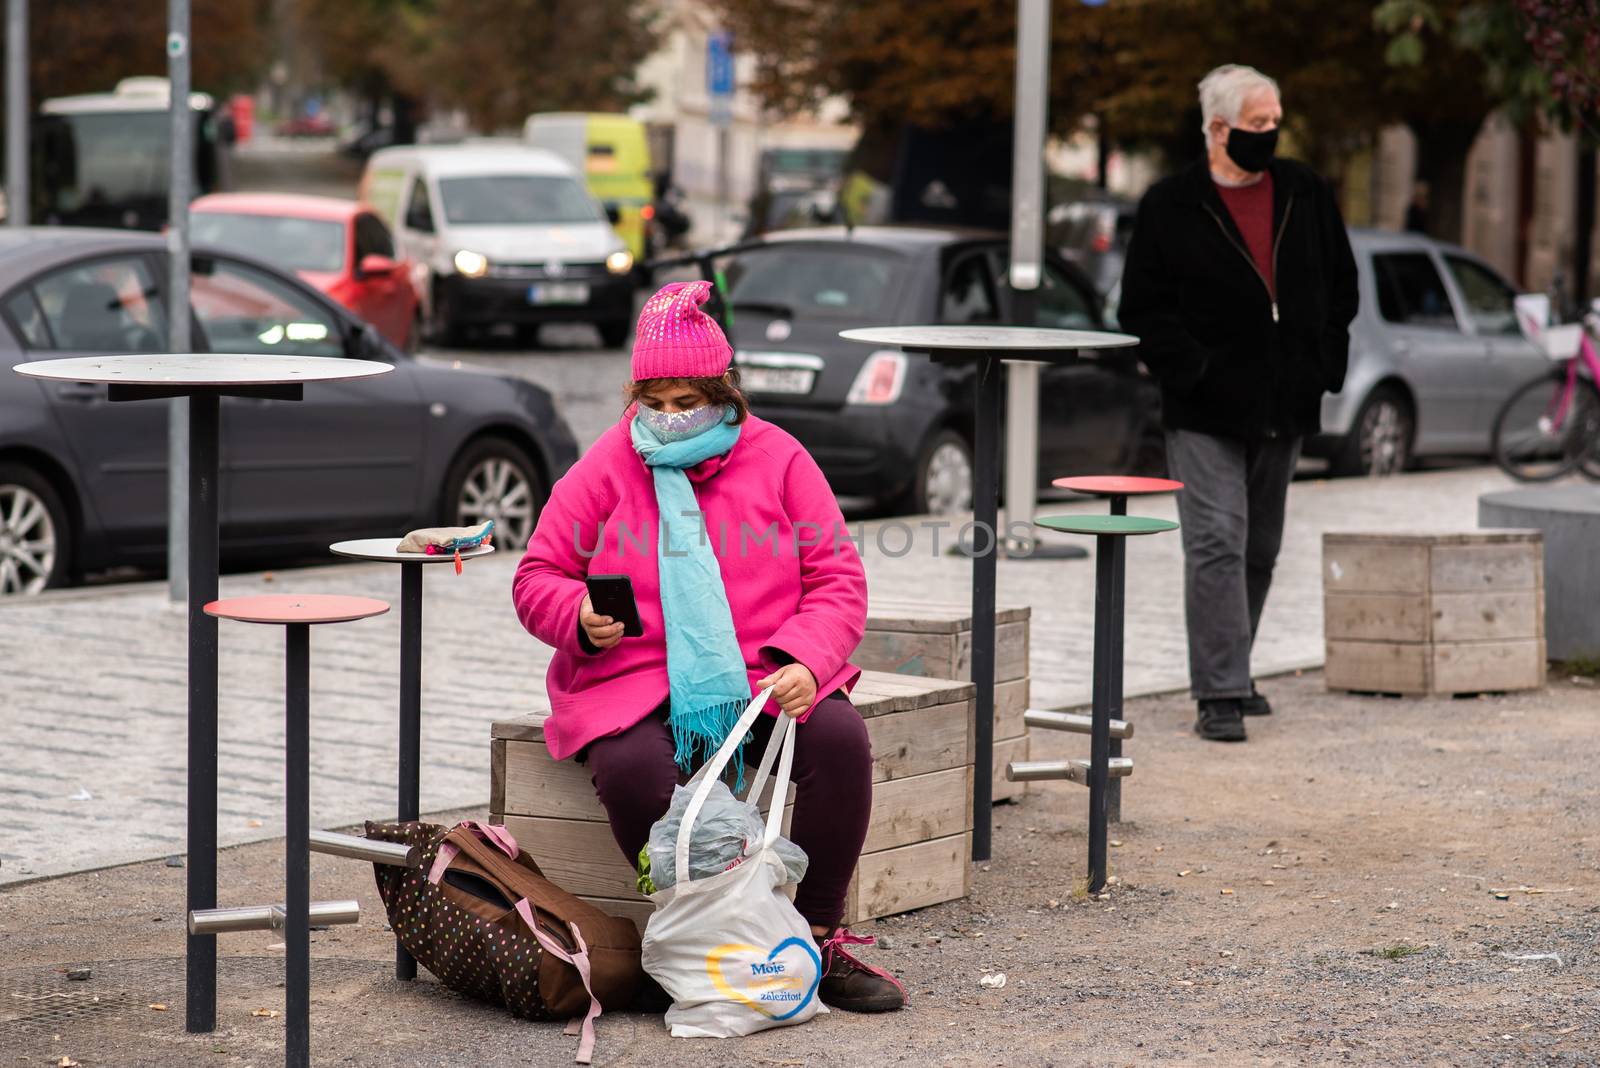 11/05/2020. Prague, Czech Republic. Woman carrying a mask resting with heavy bags during quarantine period due to outbreak of COVID-19 as winter is starting. Prague, Czech Republic by gonzalobell